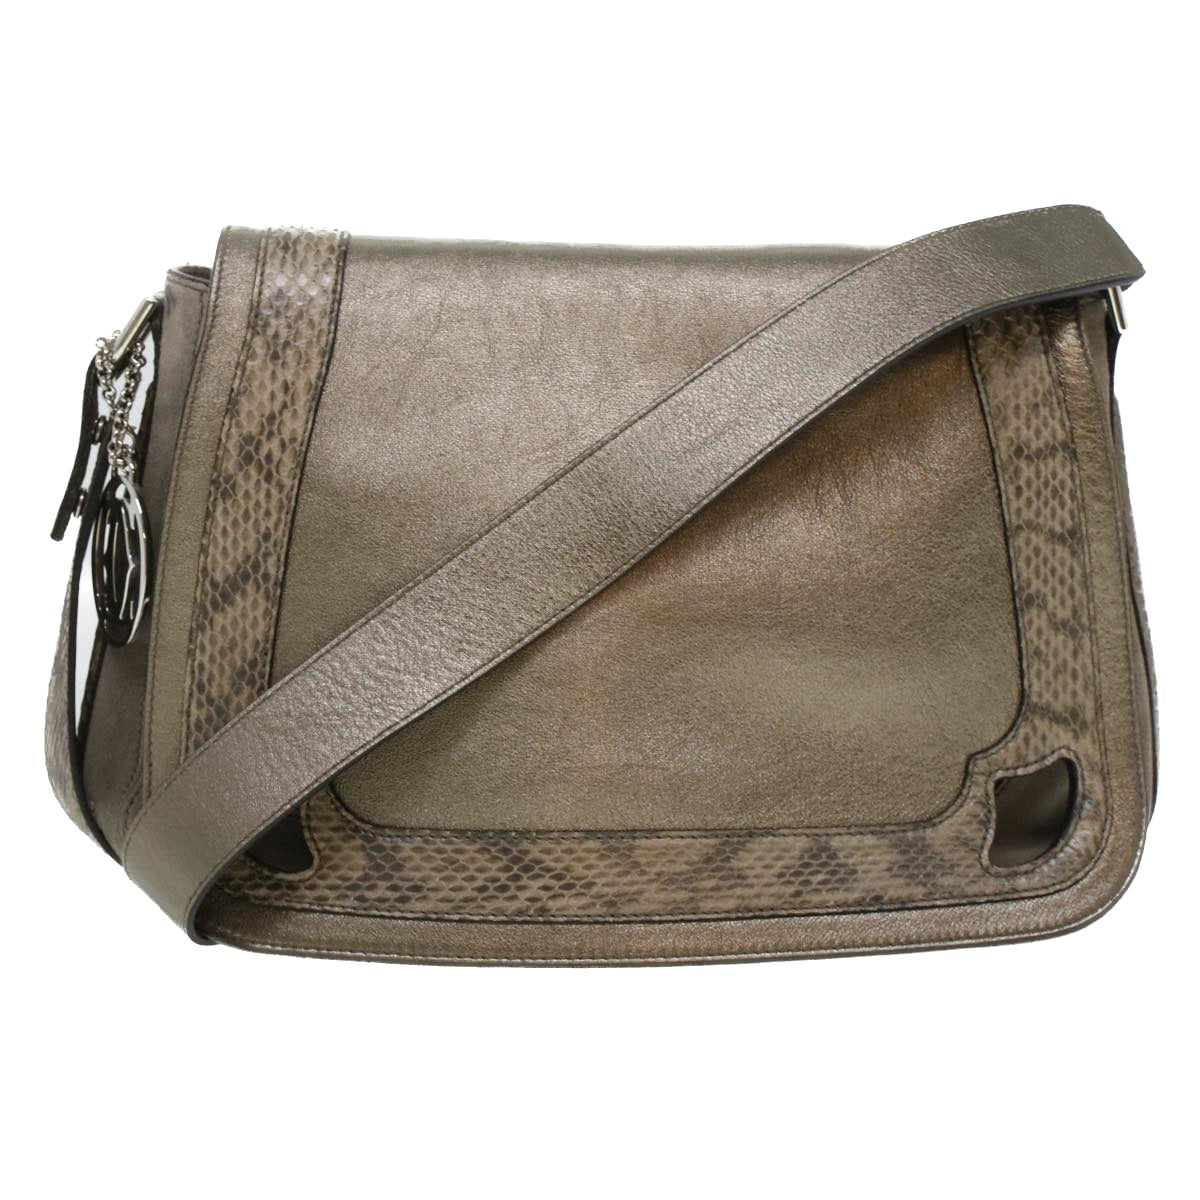 Chloe Shoulder Bag Suede Leather Gray Auth 44064